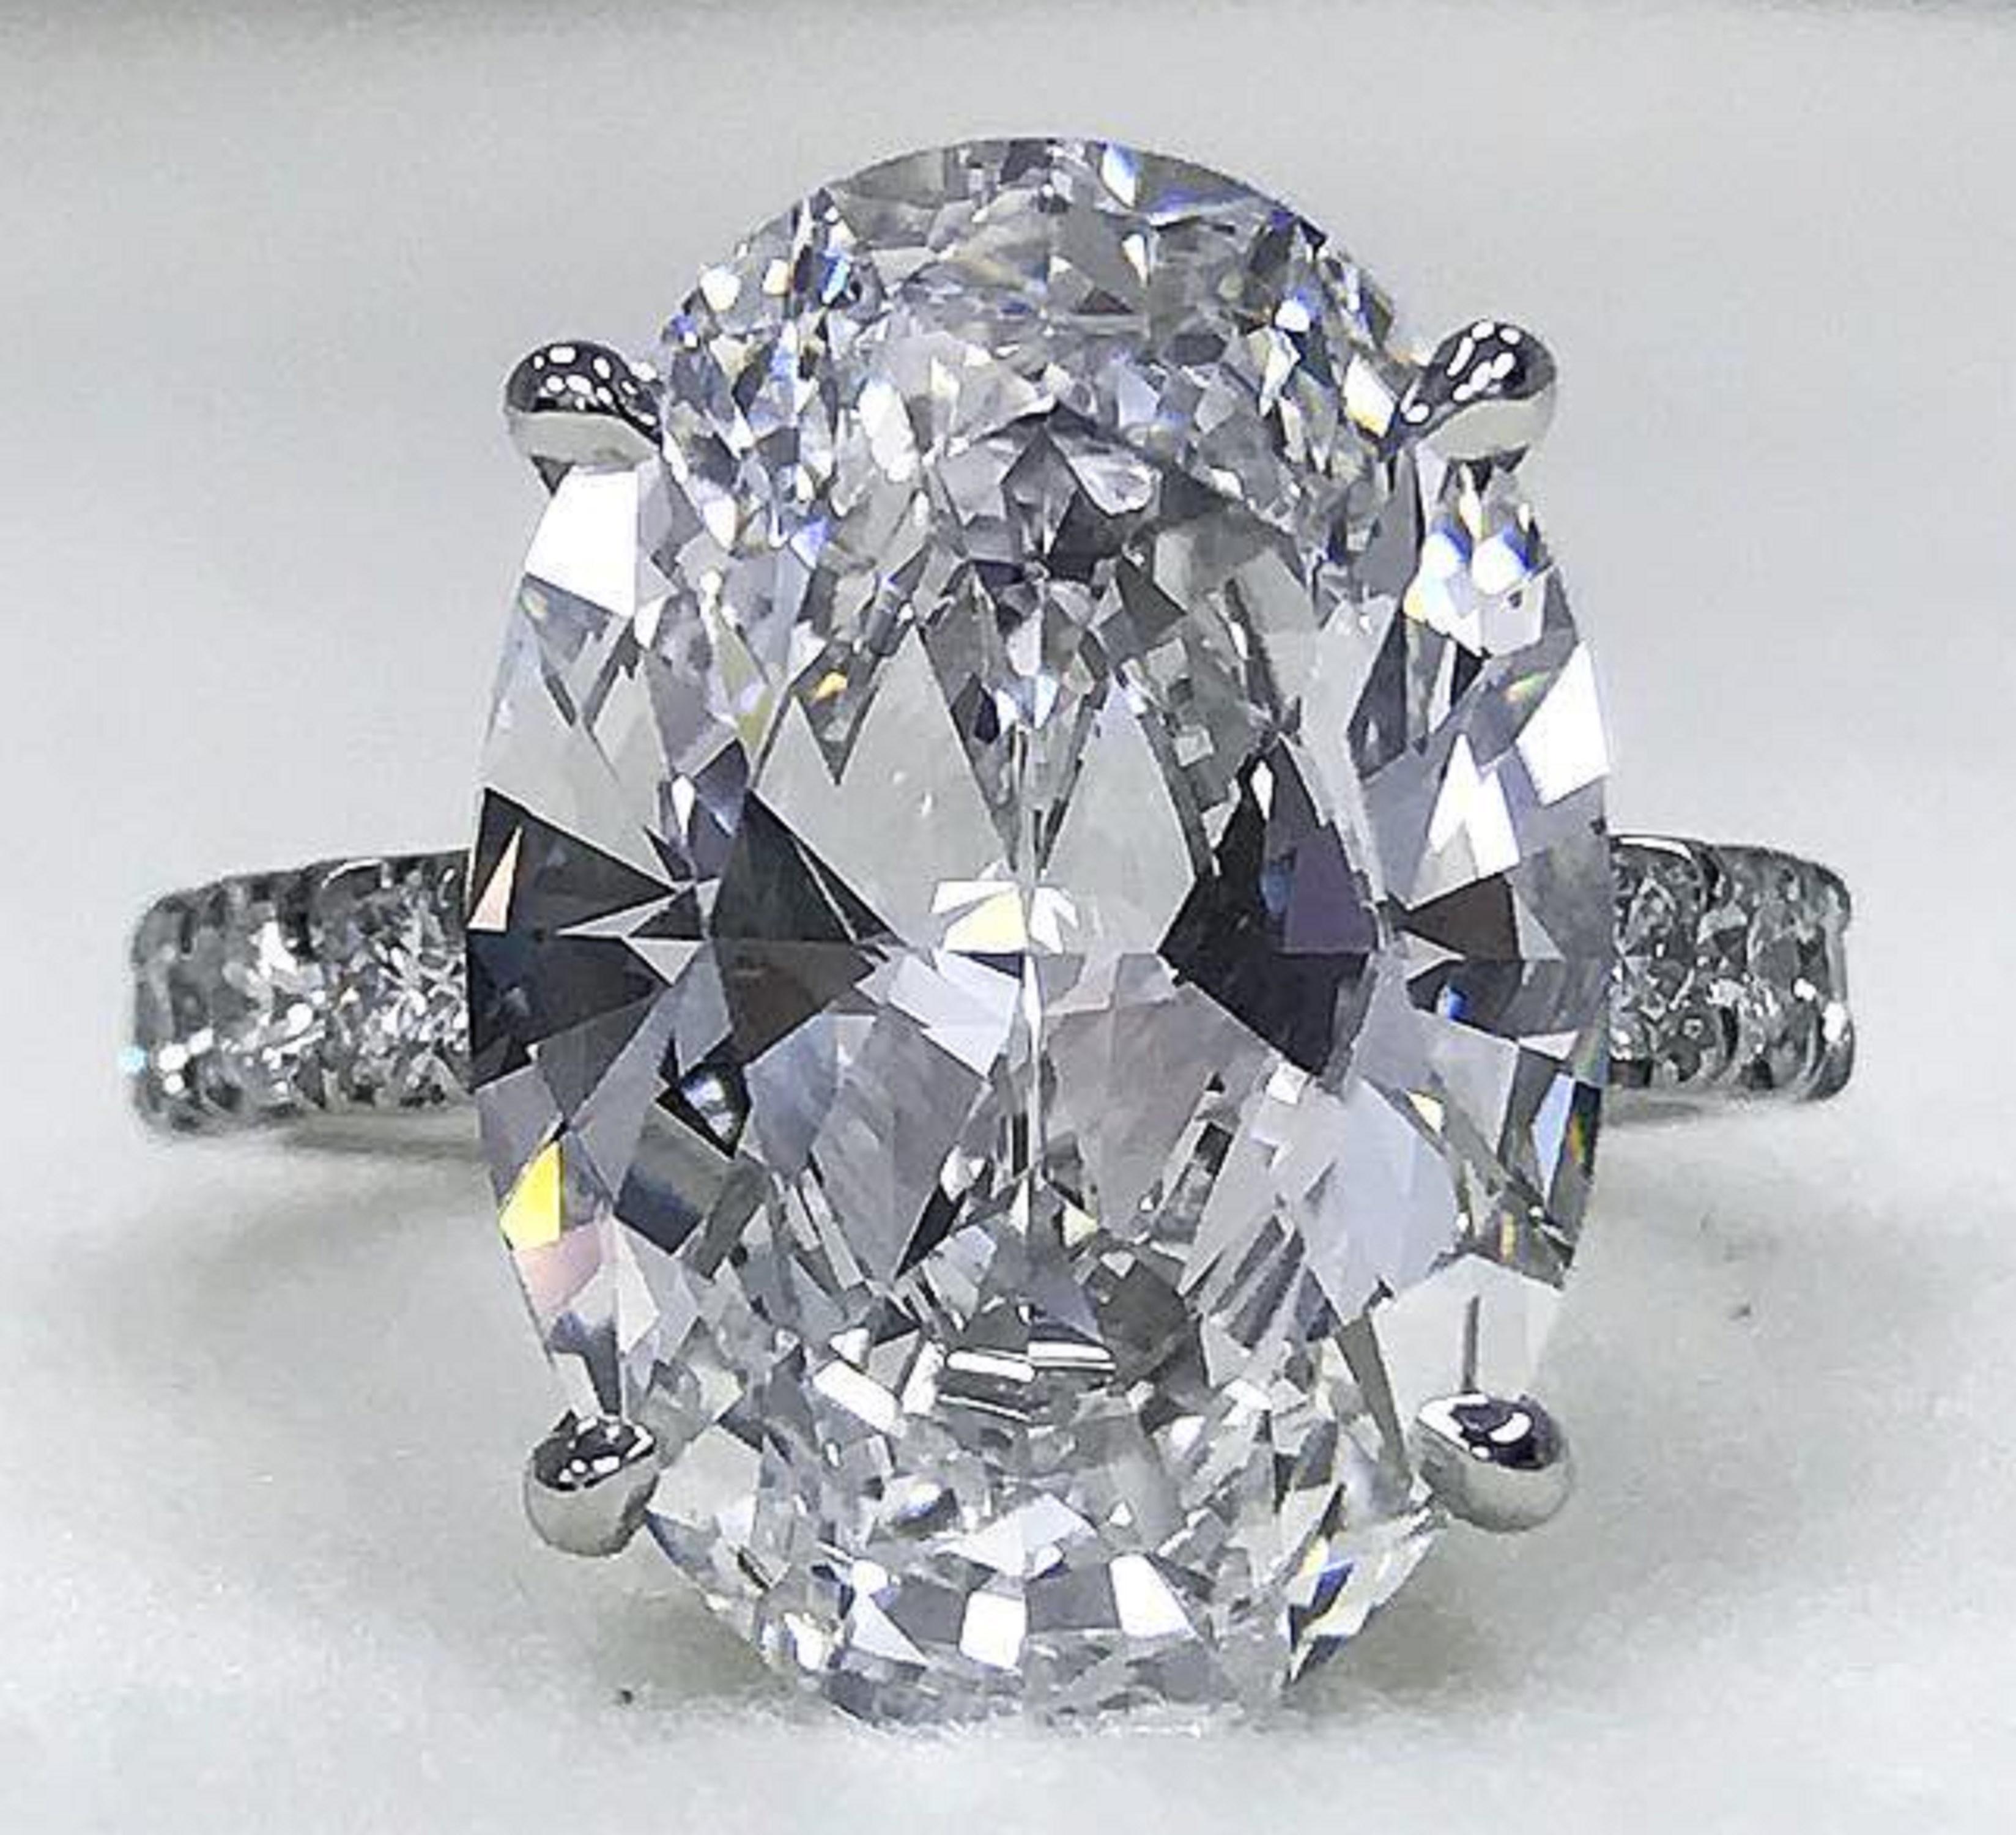 Antinori Fine Jewels is proud to offer this unique and rare flawless diamond.

This diamond is for investment purposes.
A GIA certified 5.67 carat oval Brilliant, D color,  Flawless clarity Natural Large Diamond, set in a platinum ring.
This is as